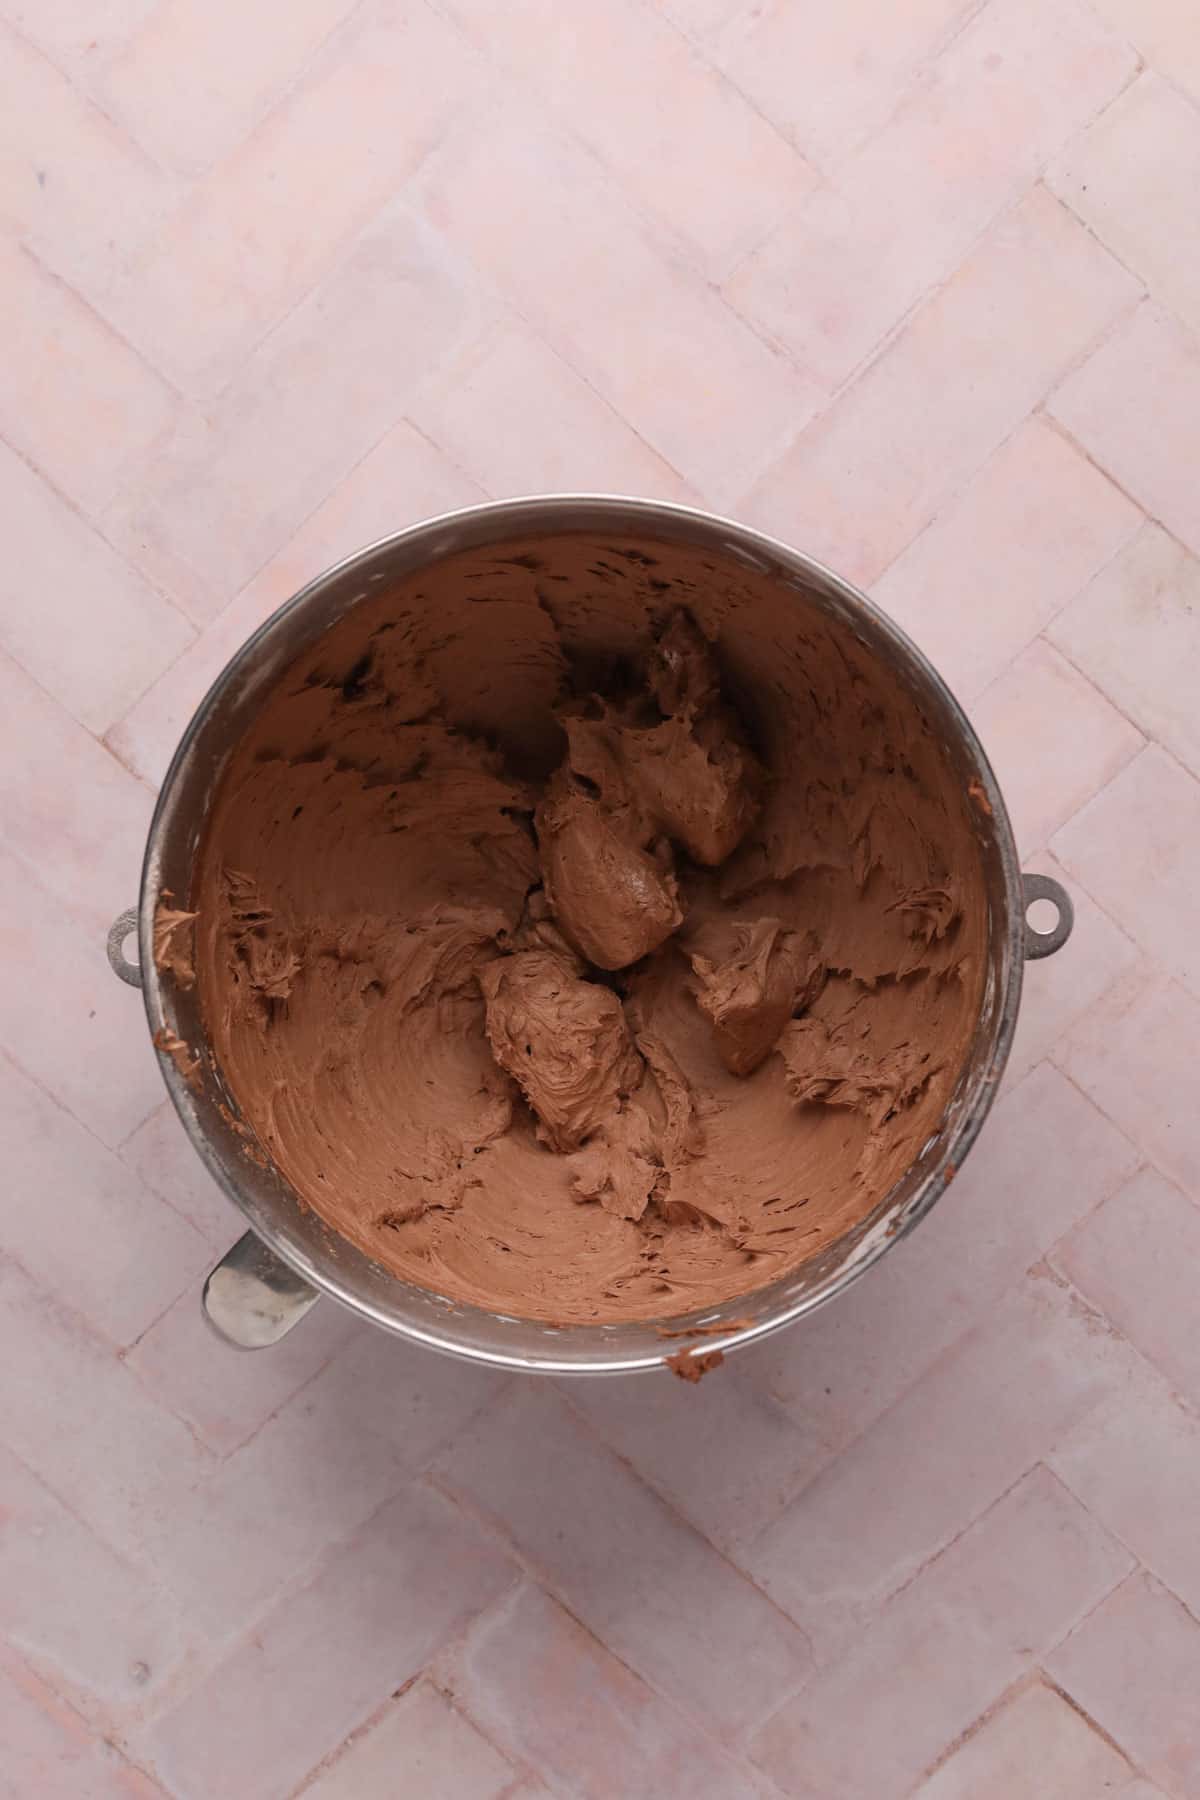 Chocolate butter cream mixed in a stand mixer bowl.